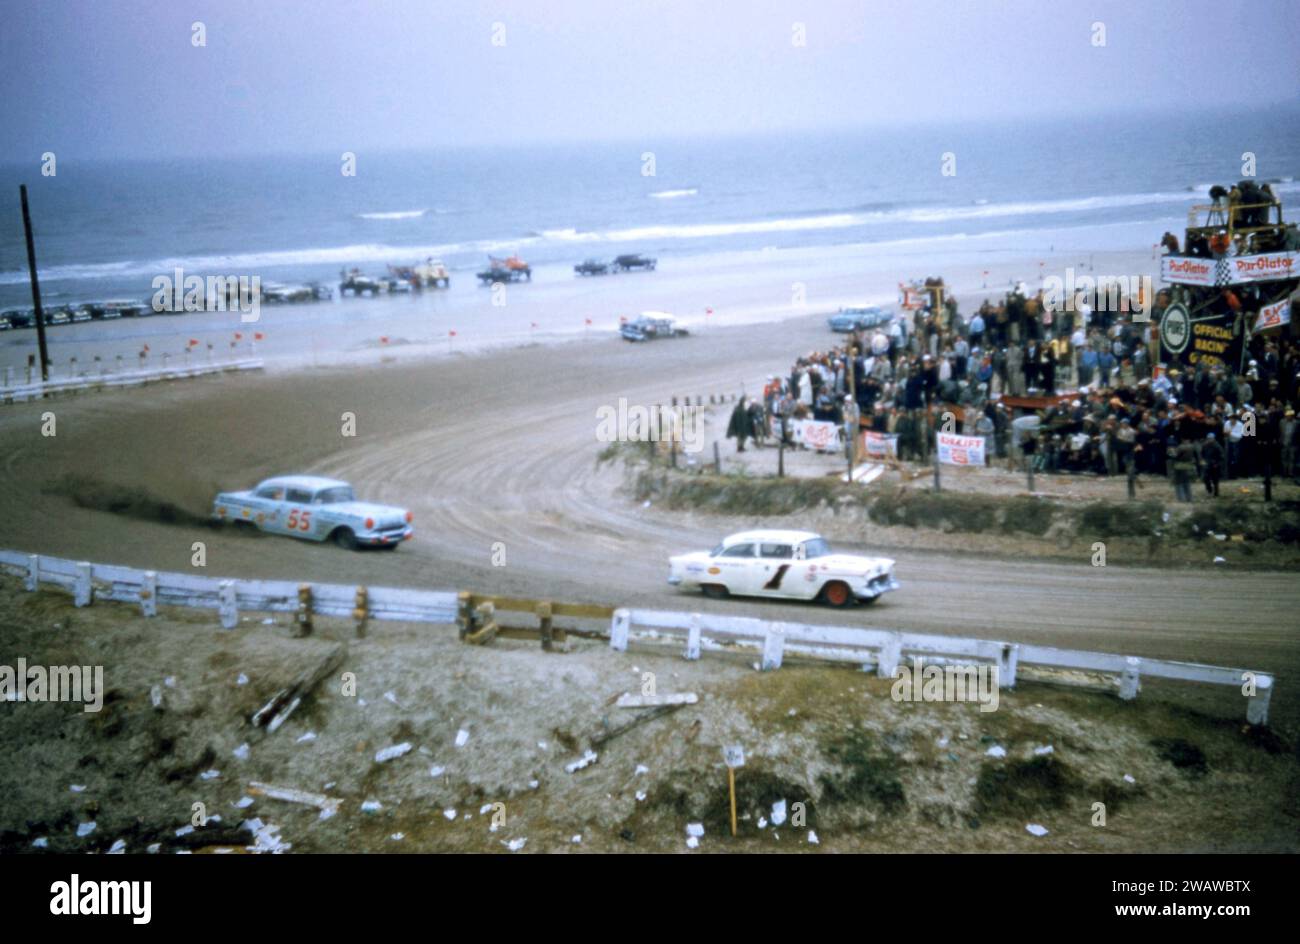 DAYTONA BEACH, FL - FEBRUARY 26: Bobby Myers in the #1 Chevrolet races past Junior Johnson in the #55 Pontiac after Johnson spun out during the 1956 NASCAR Daytona Beach and Road Course race on February 26, 1956 in Daytona Beach, Florida. (Photo by Hy Peskin) *** Local Caption *** Junior Johnson;Bobby Myers Stock Photo